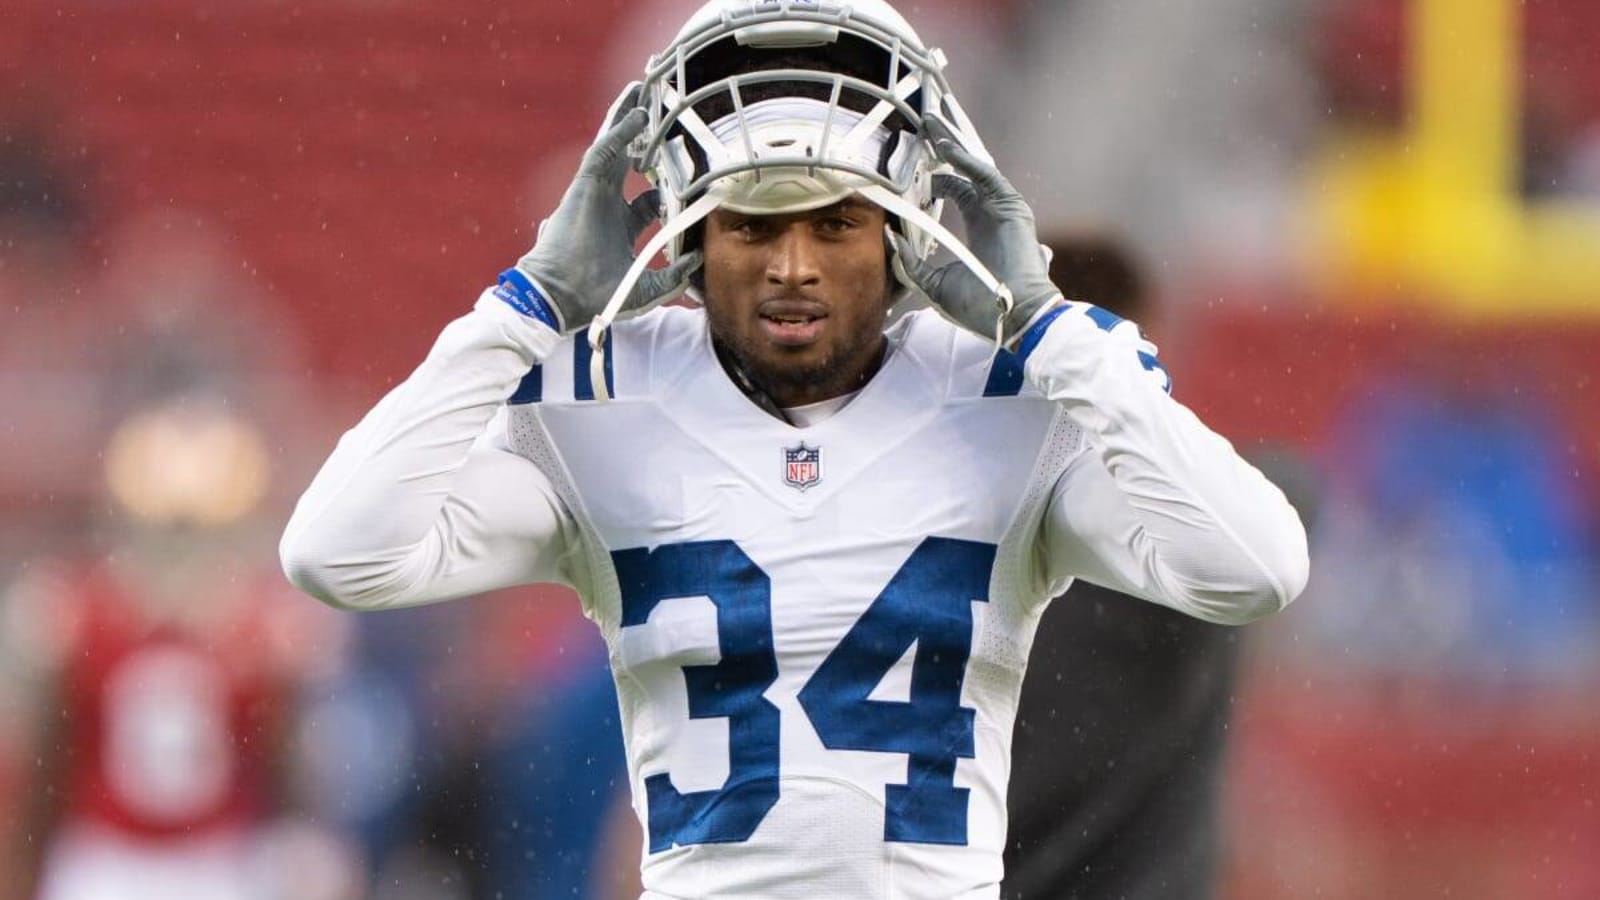 Sources: CB Isaiah Rodgers Sr. Being Investigated for Betting on Colts